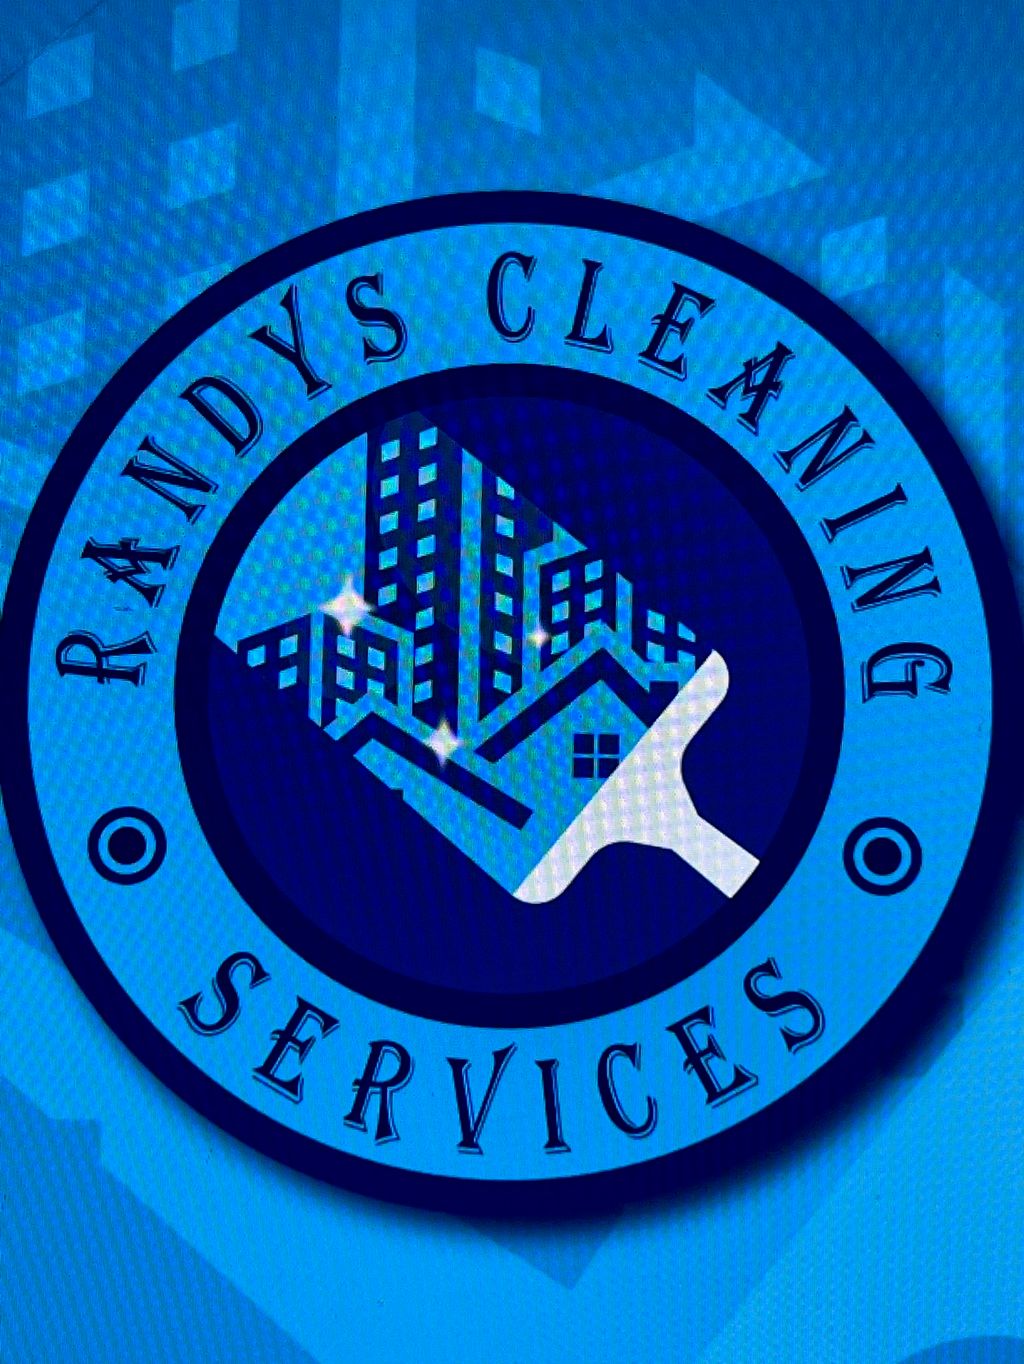 Randyscleaningservices